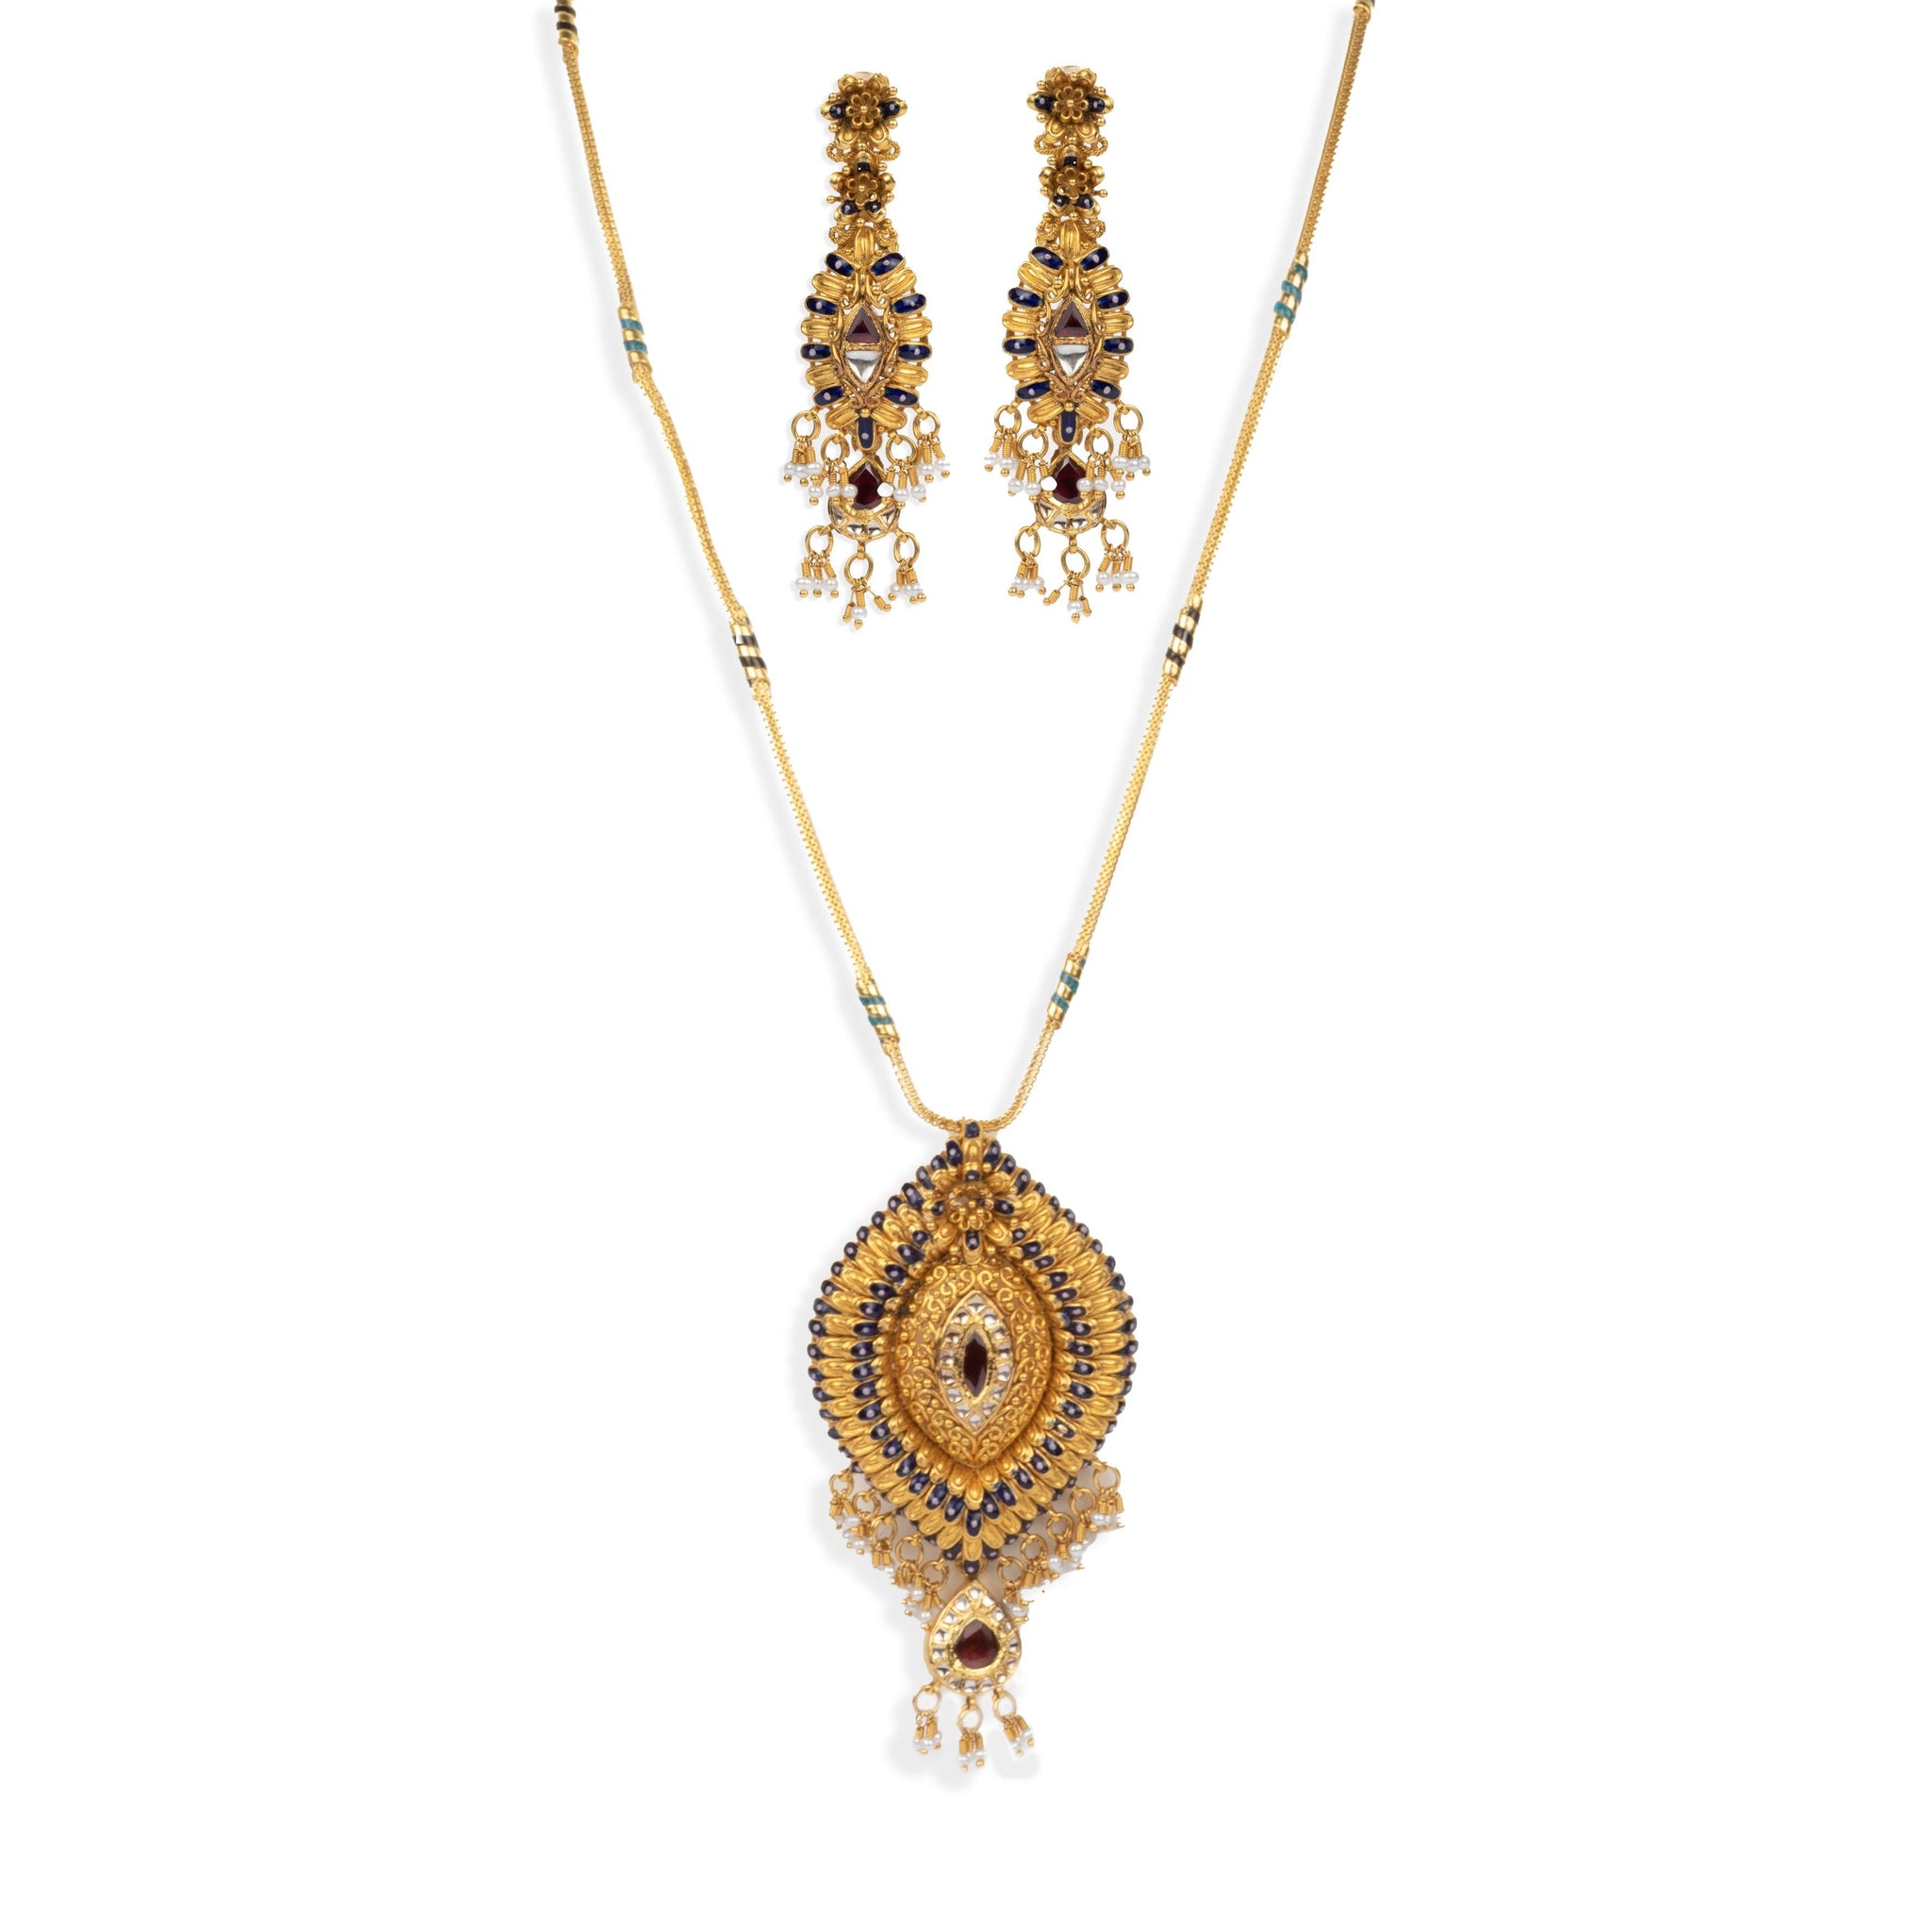 22ct Gold Antiquated Look Necklace and Earrings set with Cubic Zirconia stones (52.8g) N&E-4984